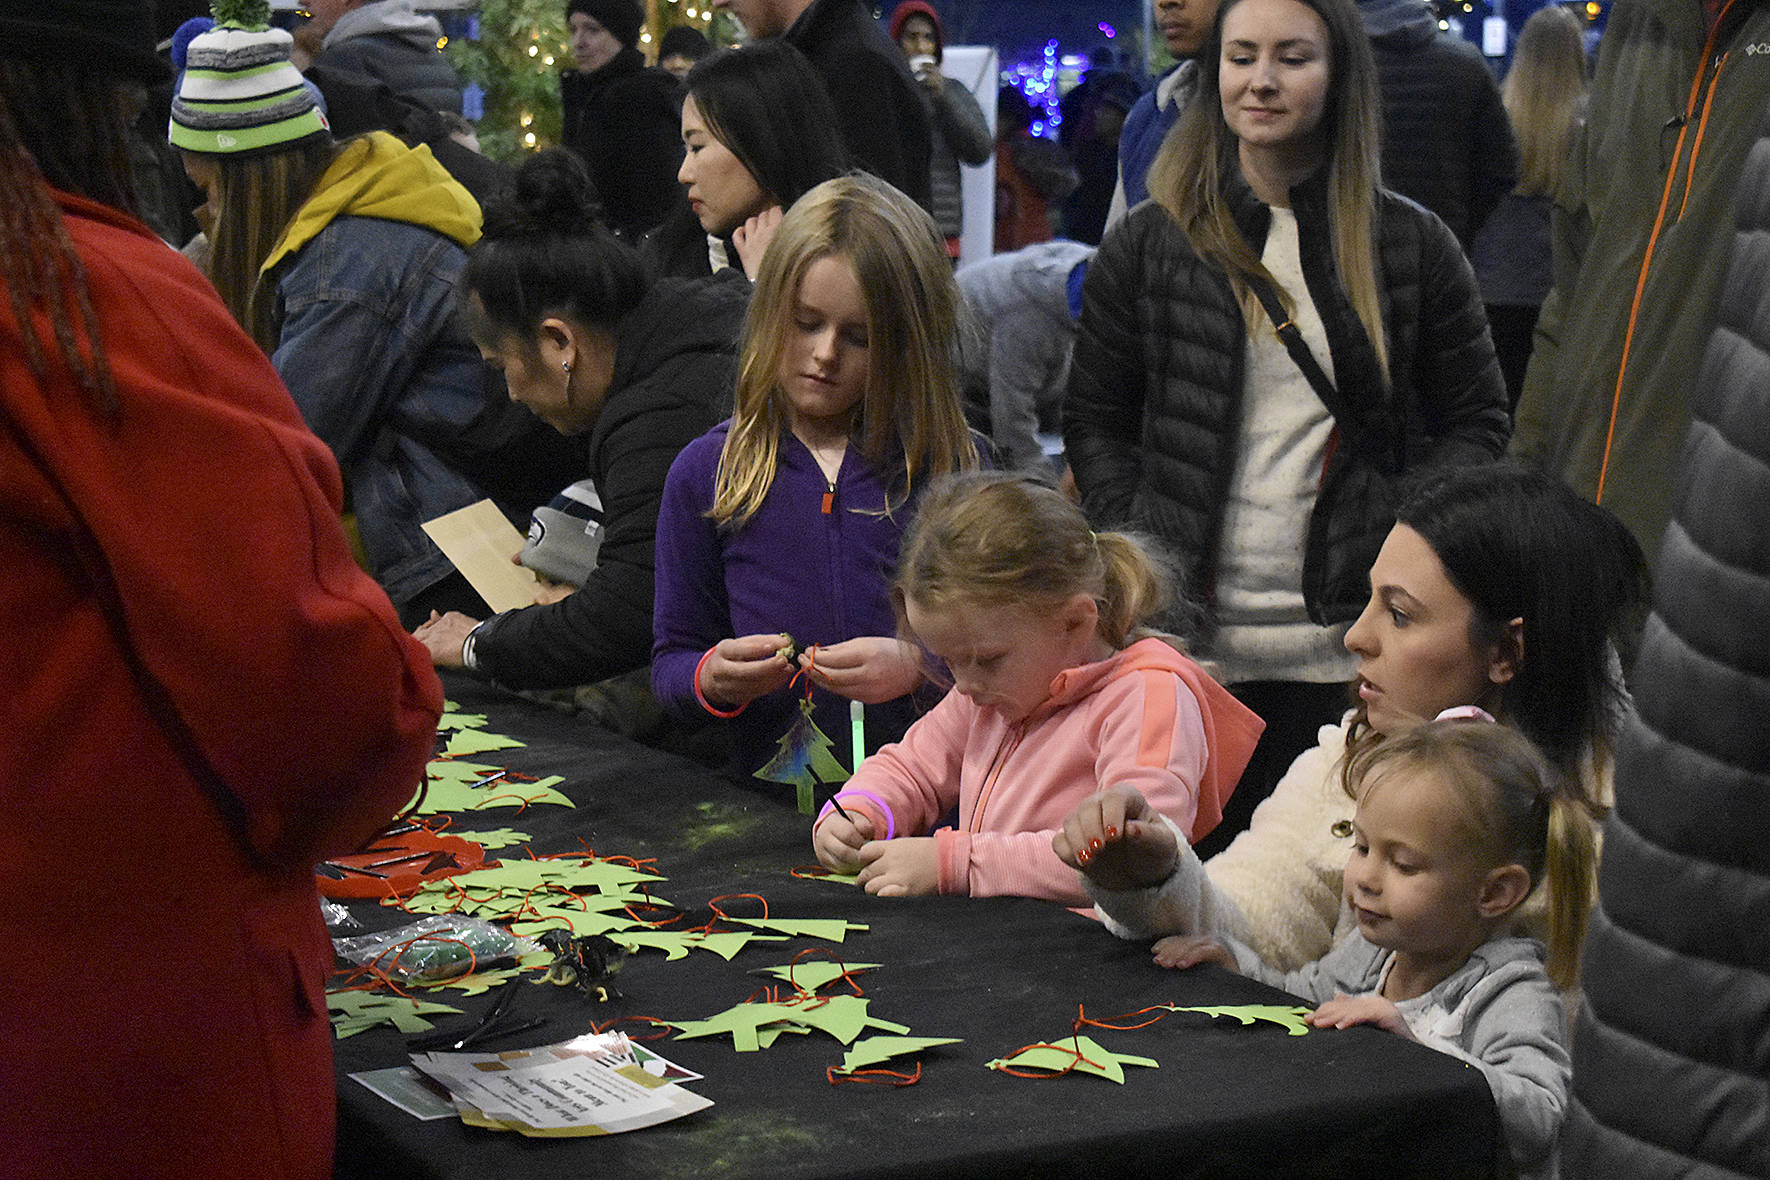 Photo by Haley Ausbun. Booths for kids to make Christmas tree decorations were one of the highlights at the pop-up market during the downtown tree lighting in Renton. Saturday, Nov. 30 at the Renton Pavilion Events Center.